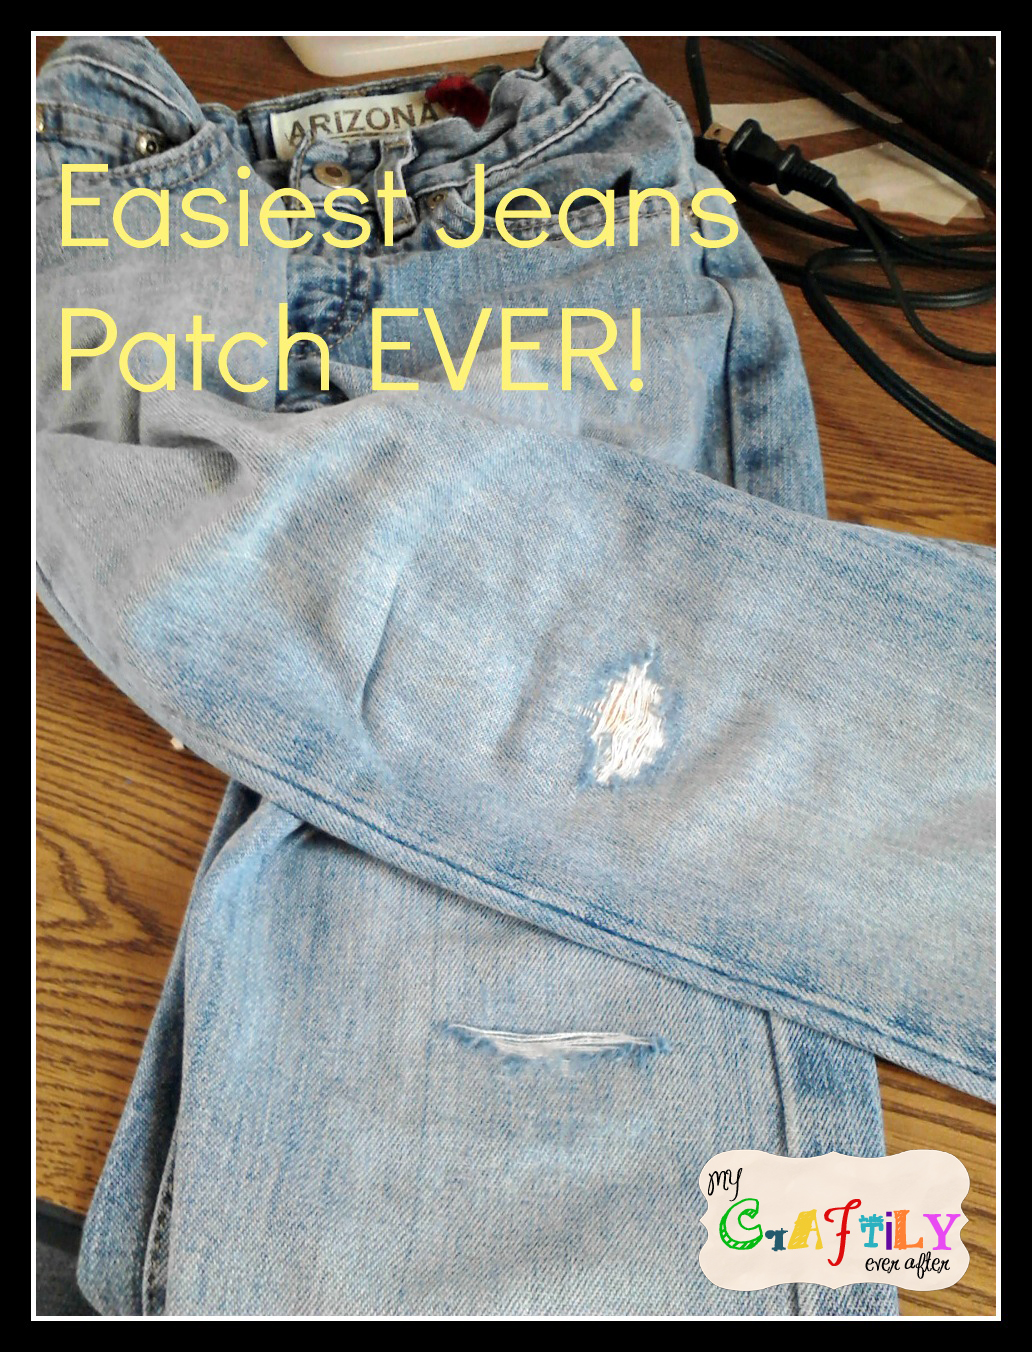 HOW TO PATCH A HOLE IN YOUR JEANS - Merrick's Art